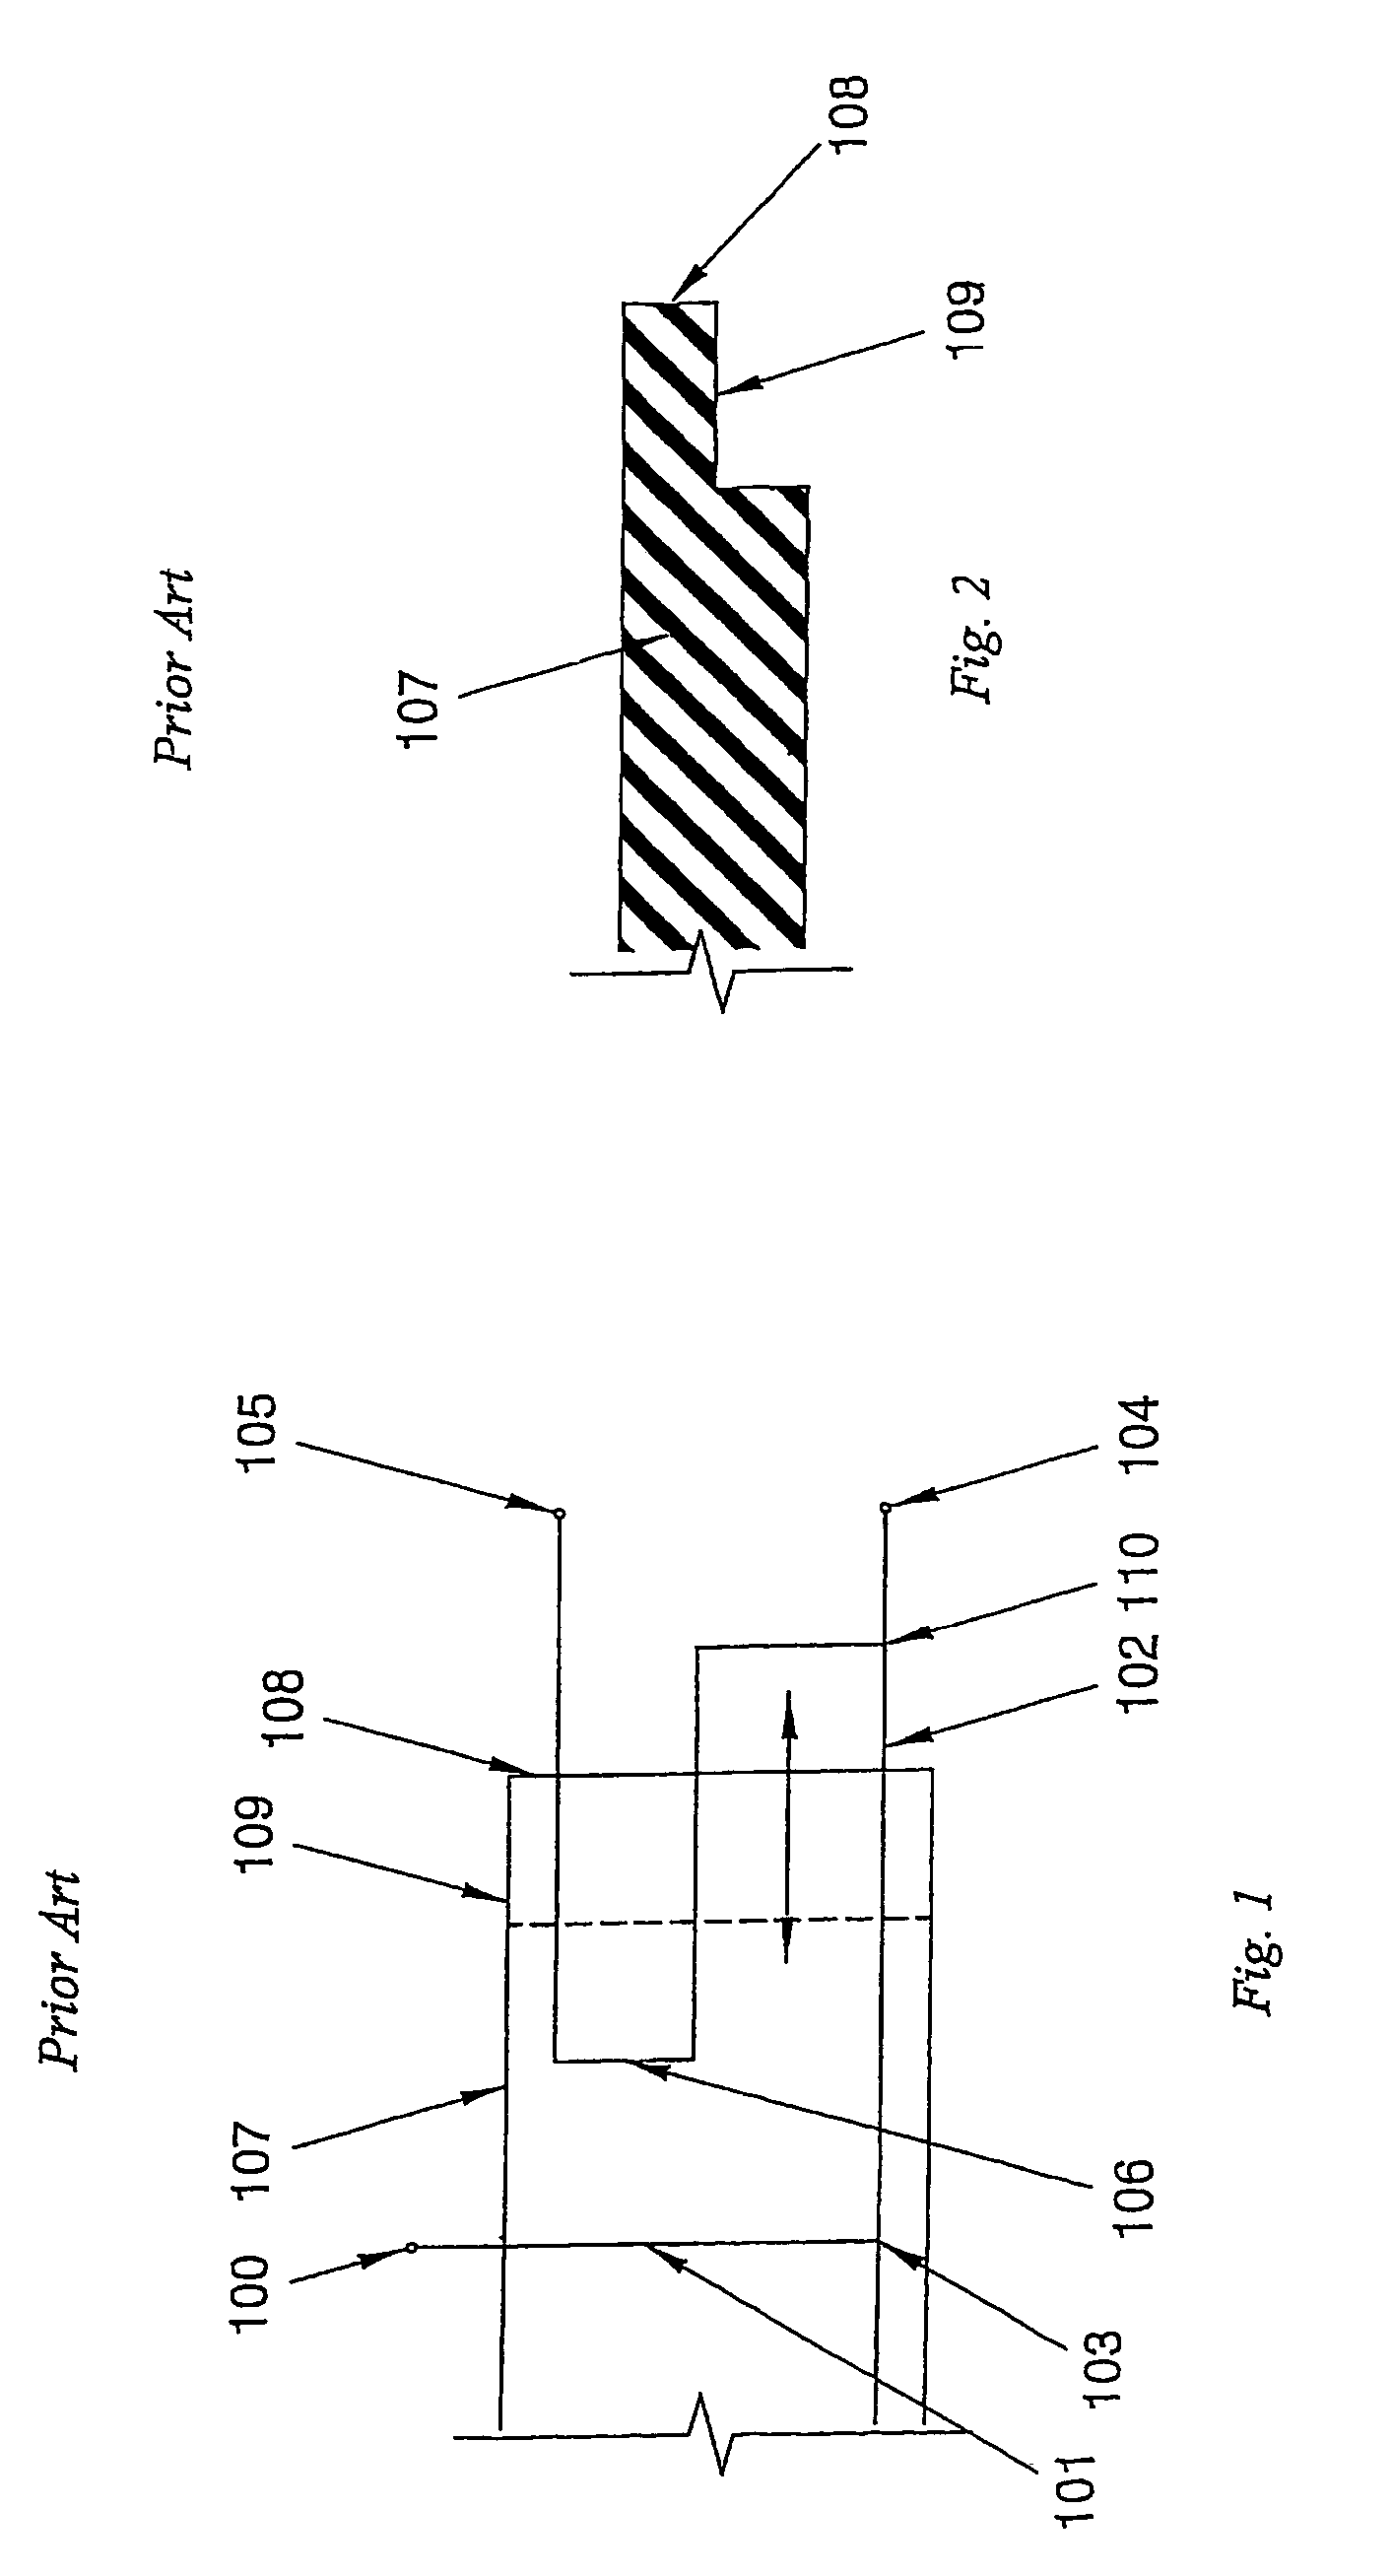 Adjustable antenna feed network with integrated phase shifter